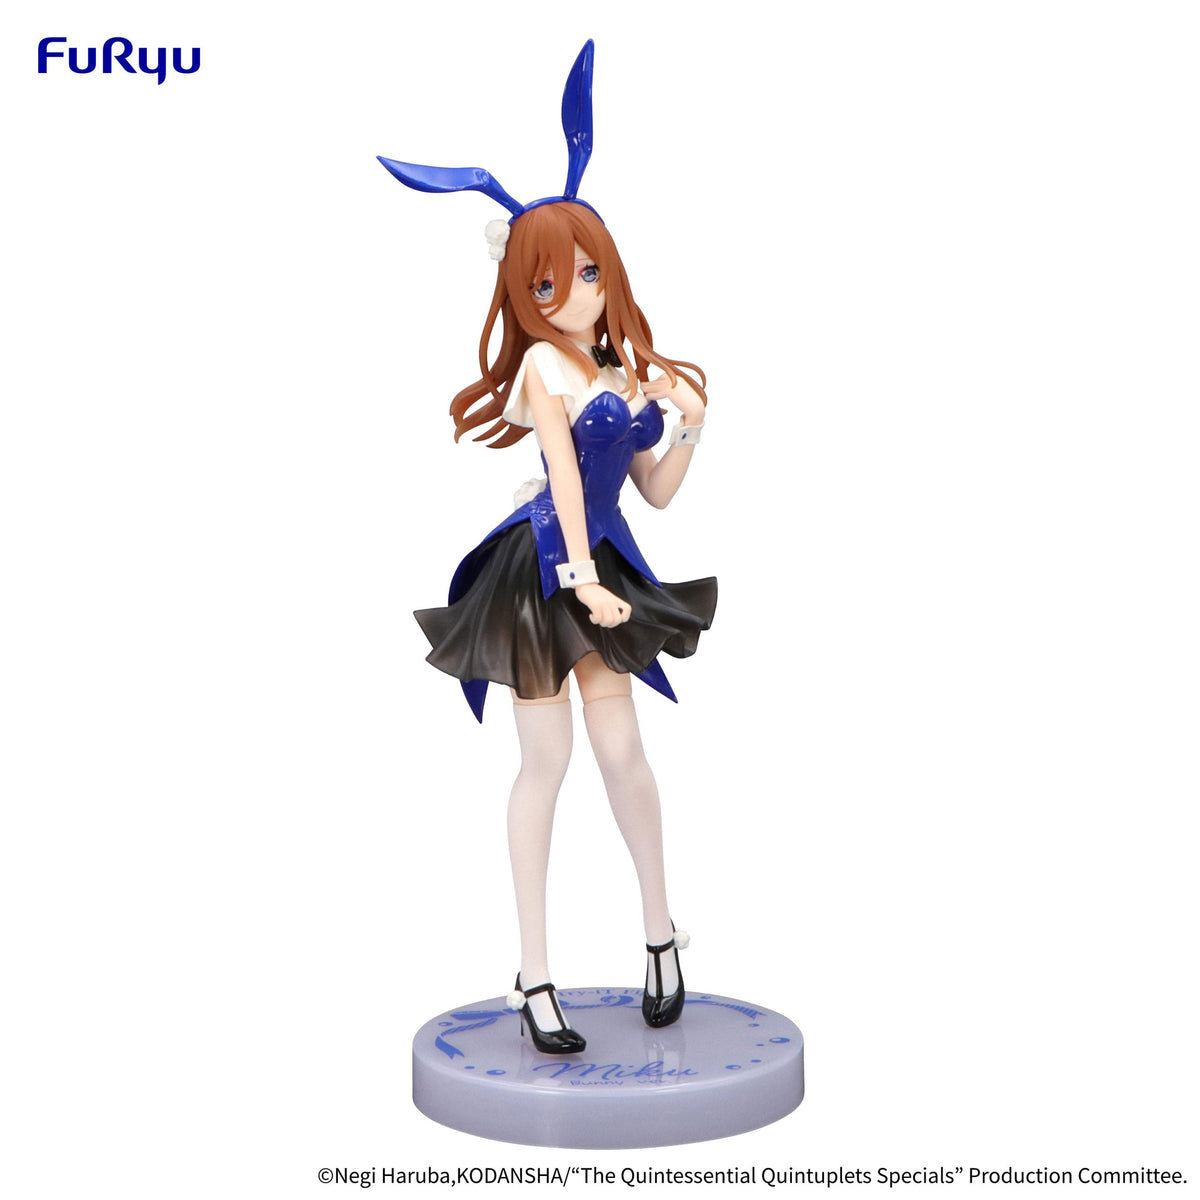 The Quintessential Quintuplets - Miku Nakano - Bunnies Another Color Trio -Try -It Figure (FuryU)